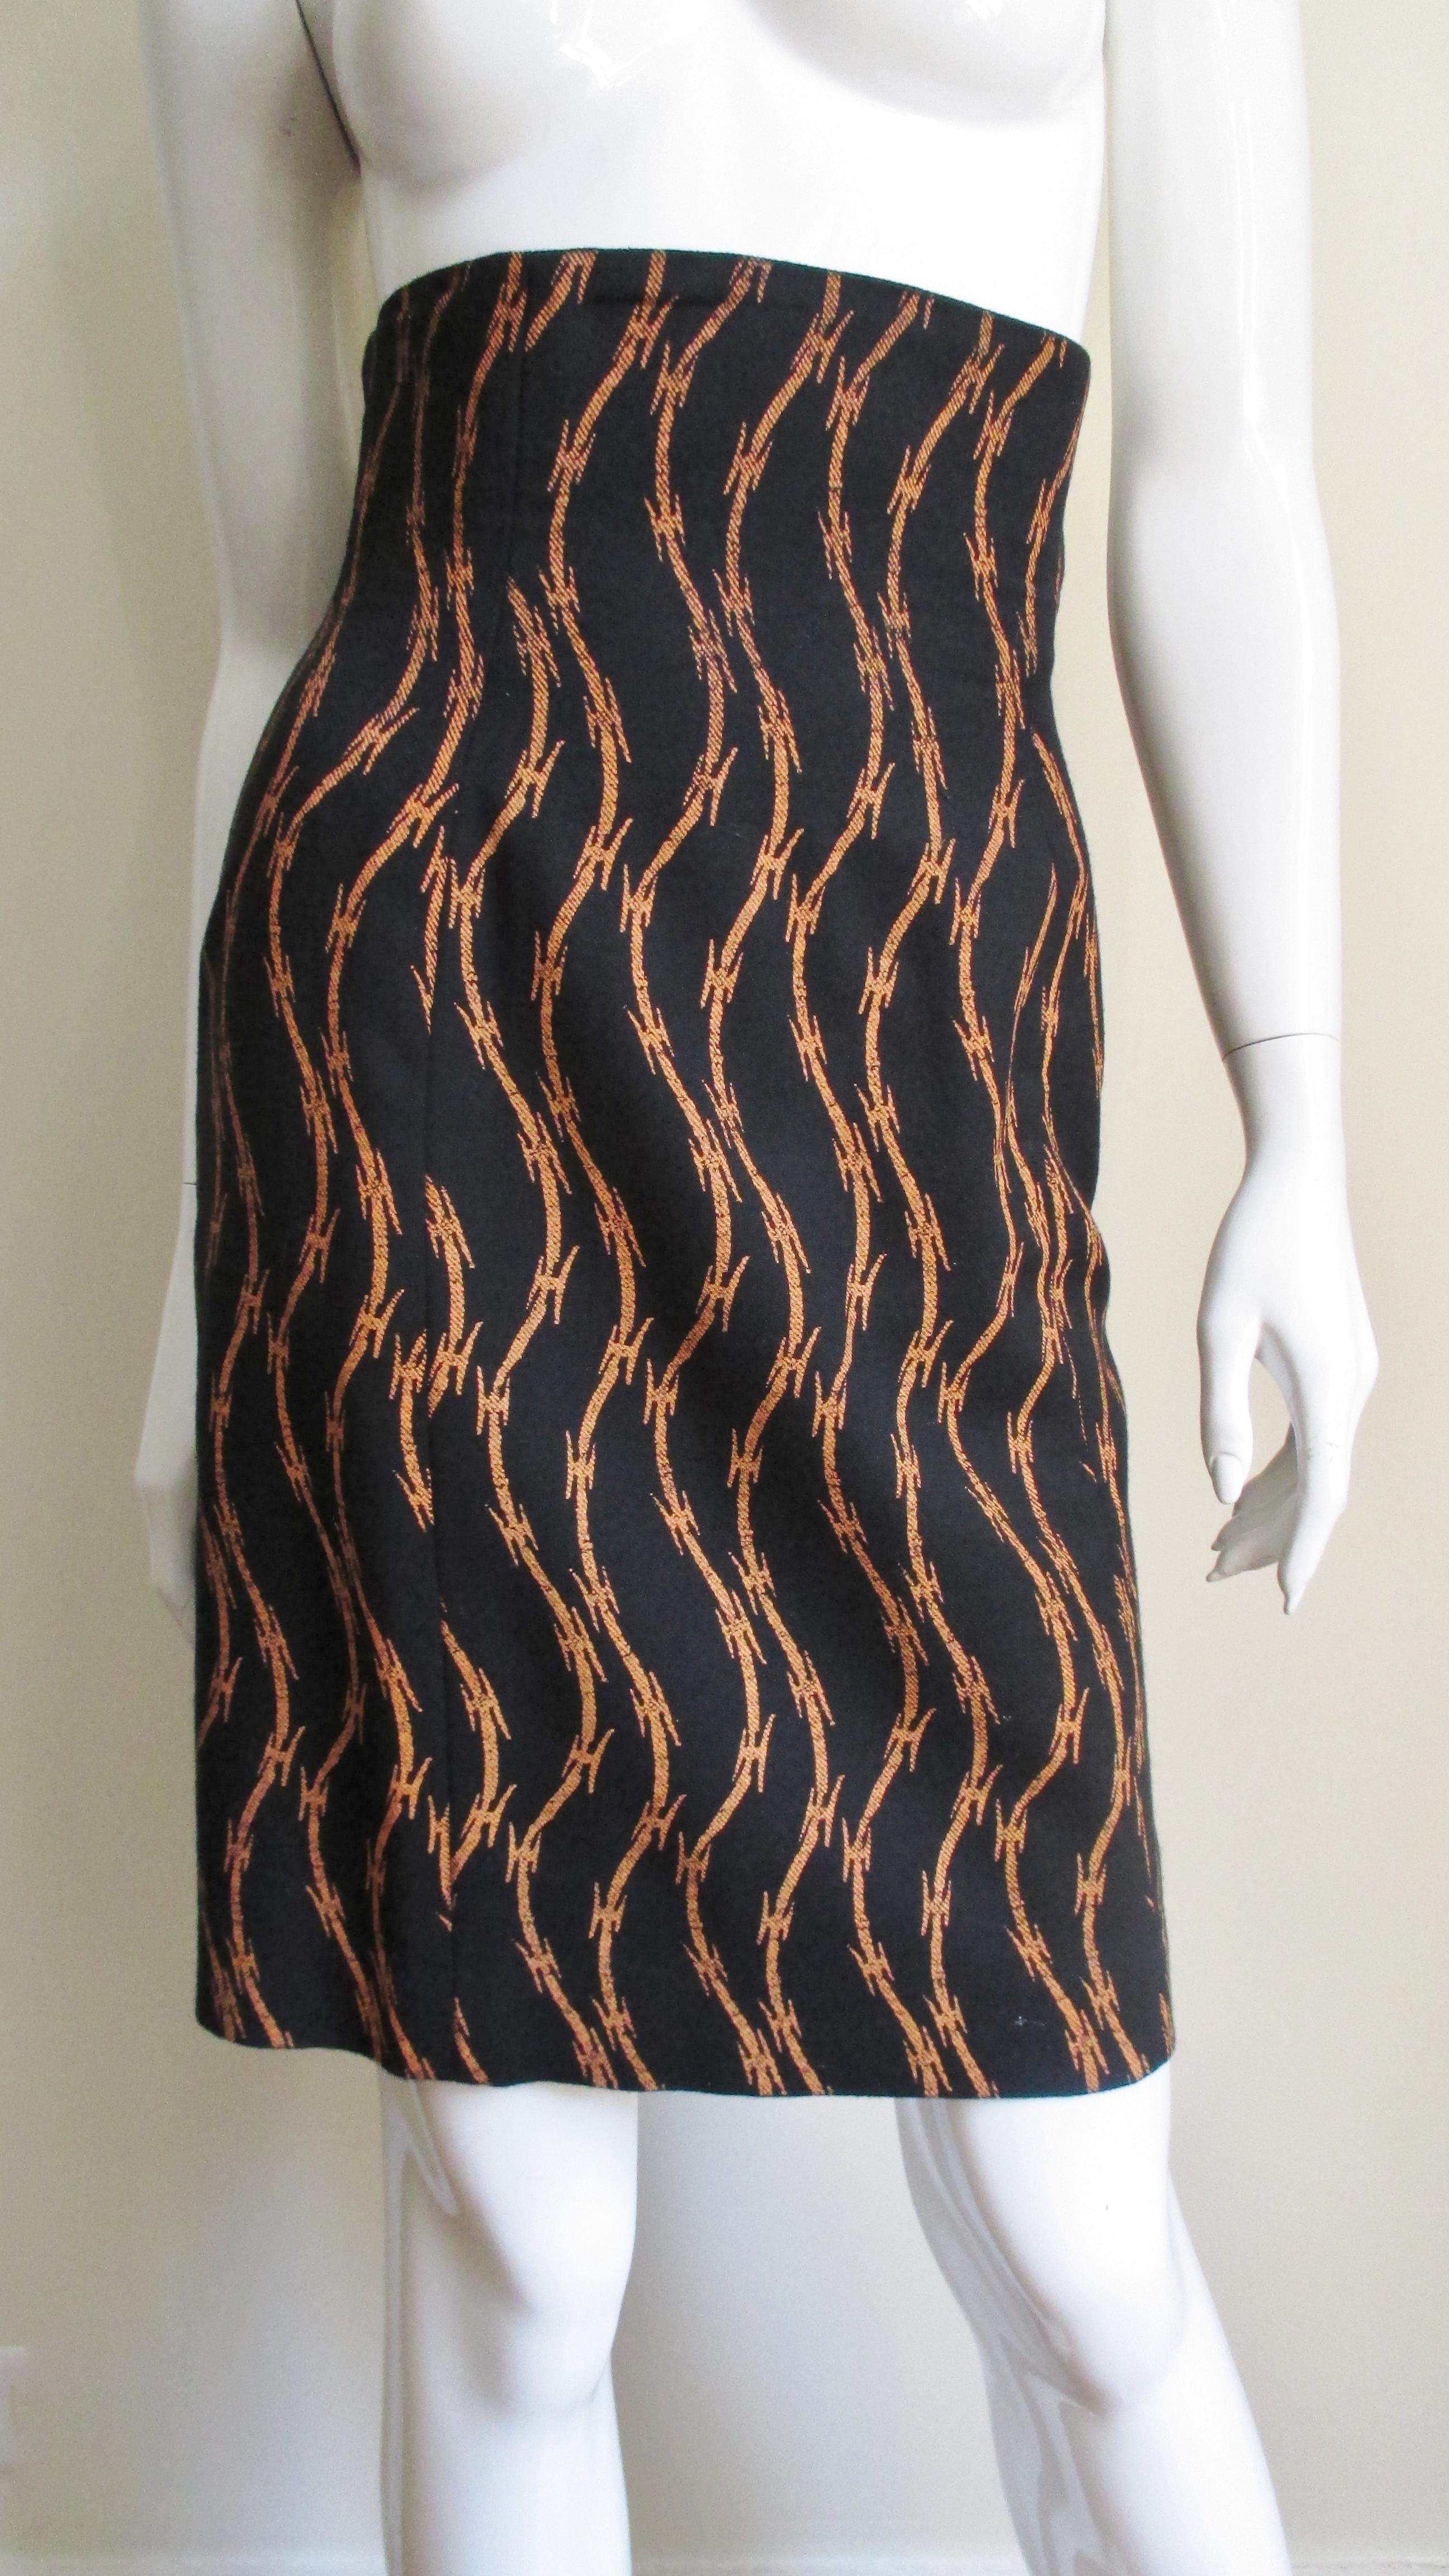 An iconic wool skirt from Stephen Sprouse with golden vertical rows of barbed wire popping against a black background.  The high waisted pencil style skirt is fully lined with a side zipper.
Fits sizes Small, Medium.

Waist  29